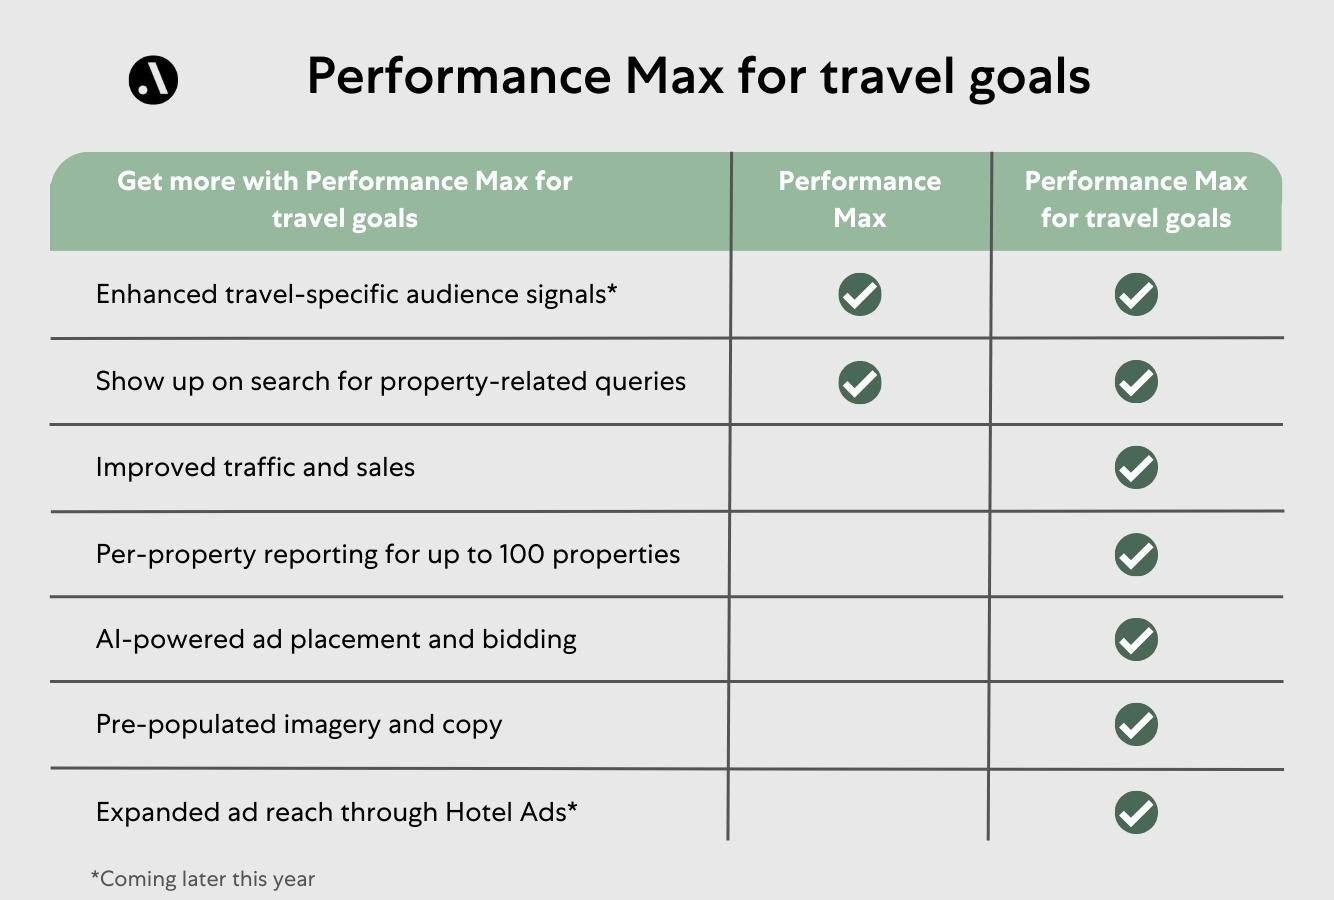 Performance Max for travel goals